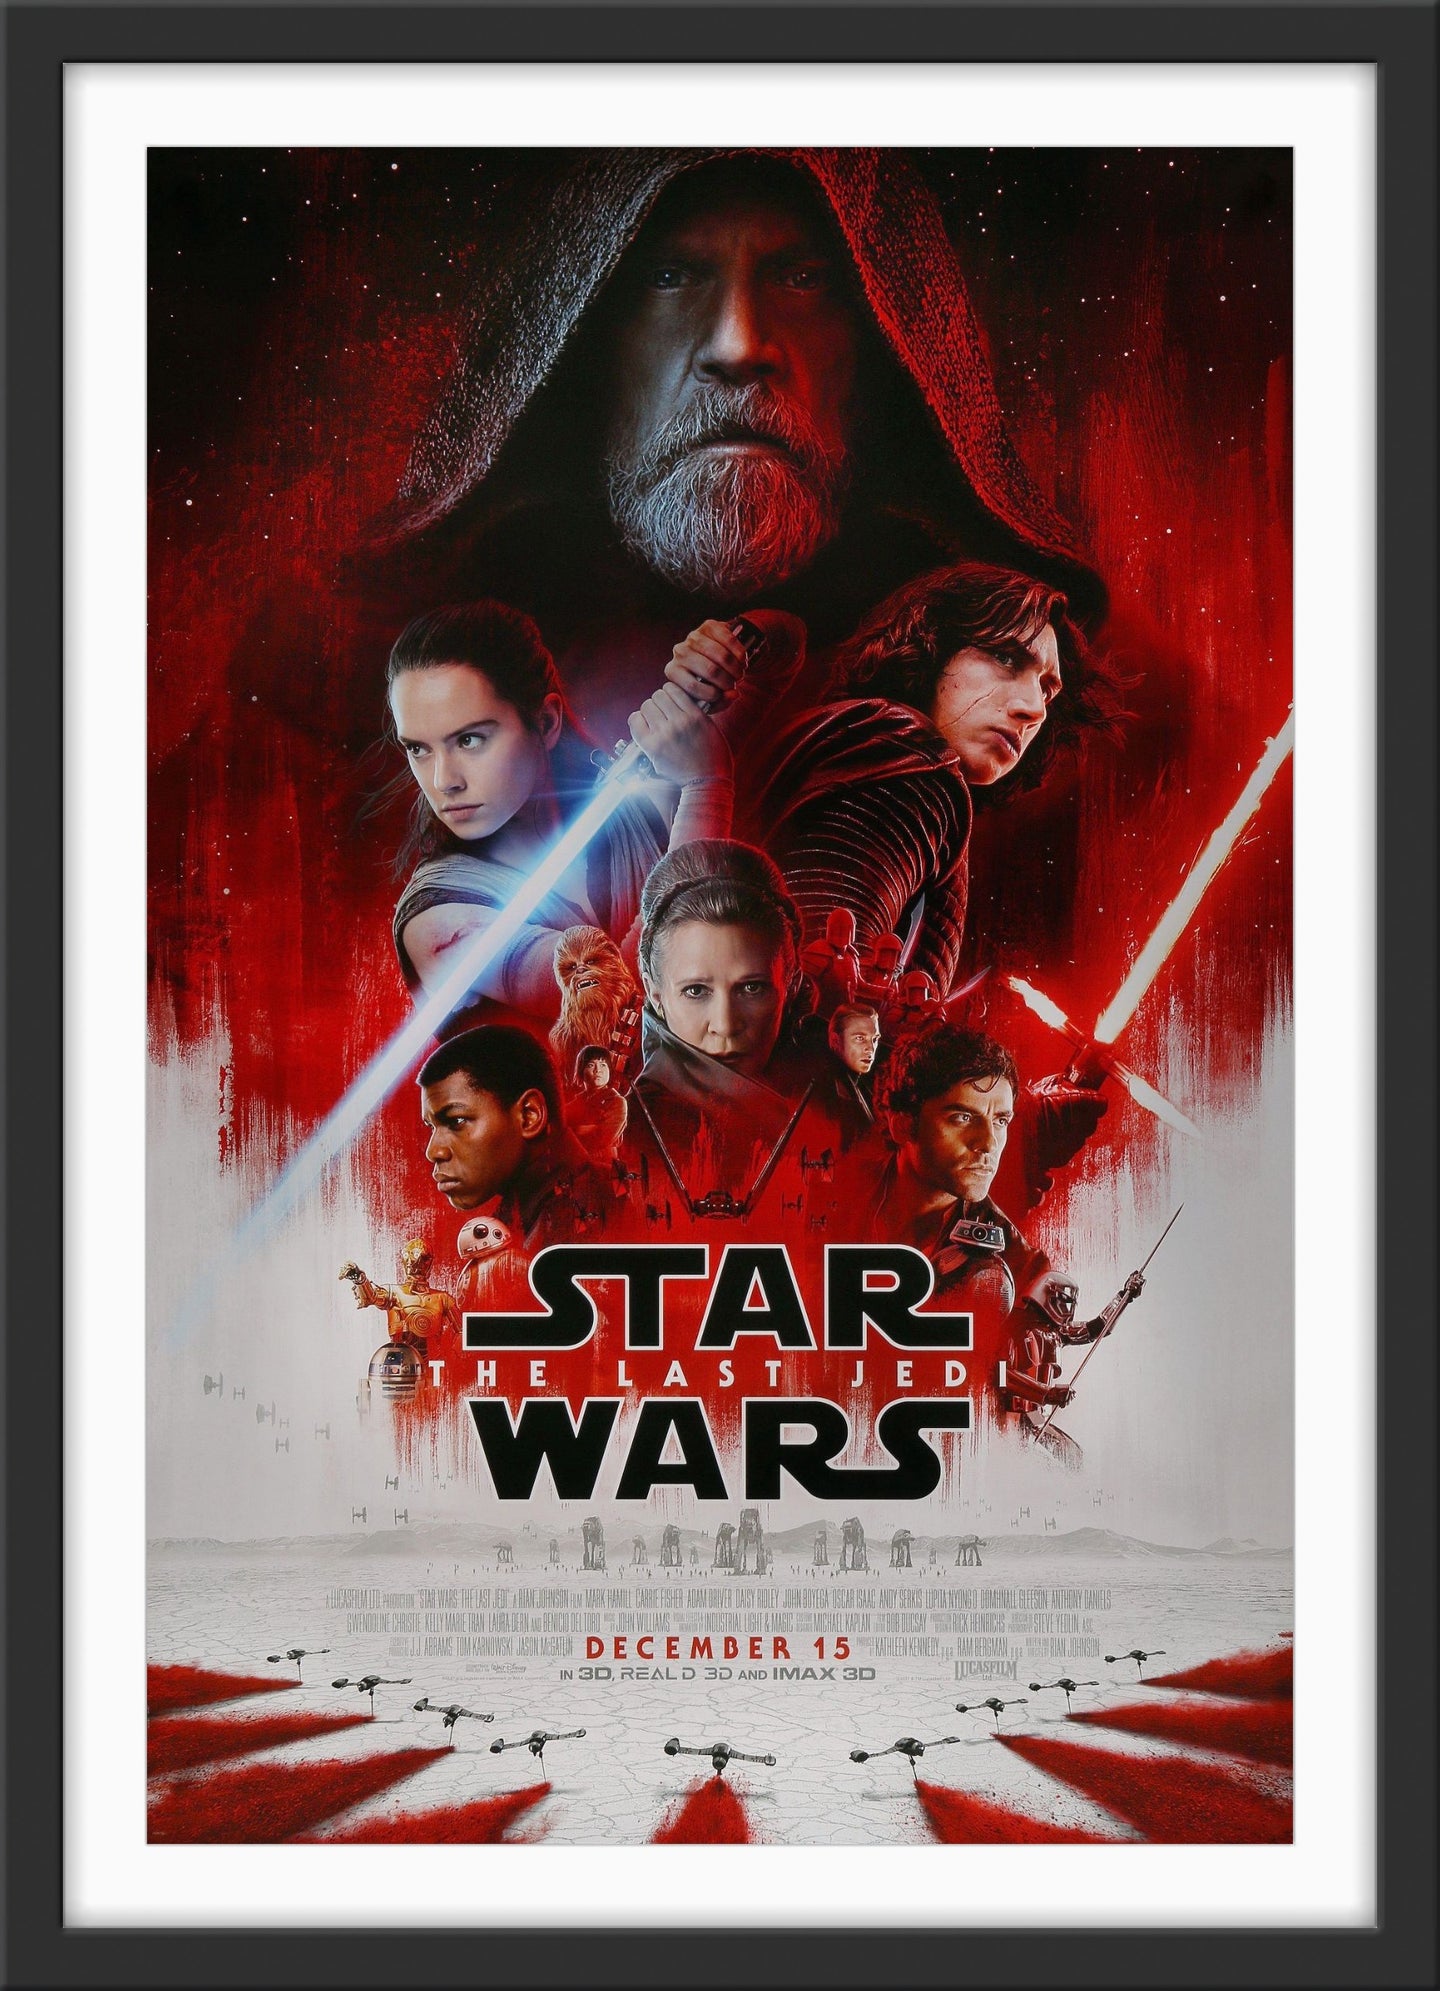 An original movie poster for the Star Wars film The Last Jedi, episode 8